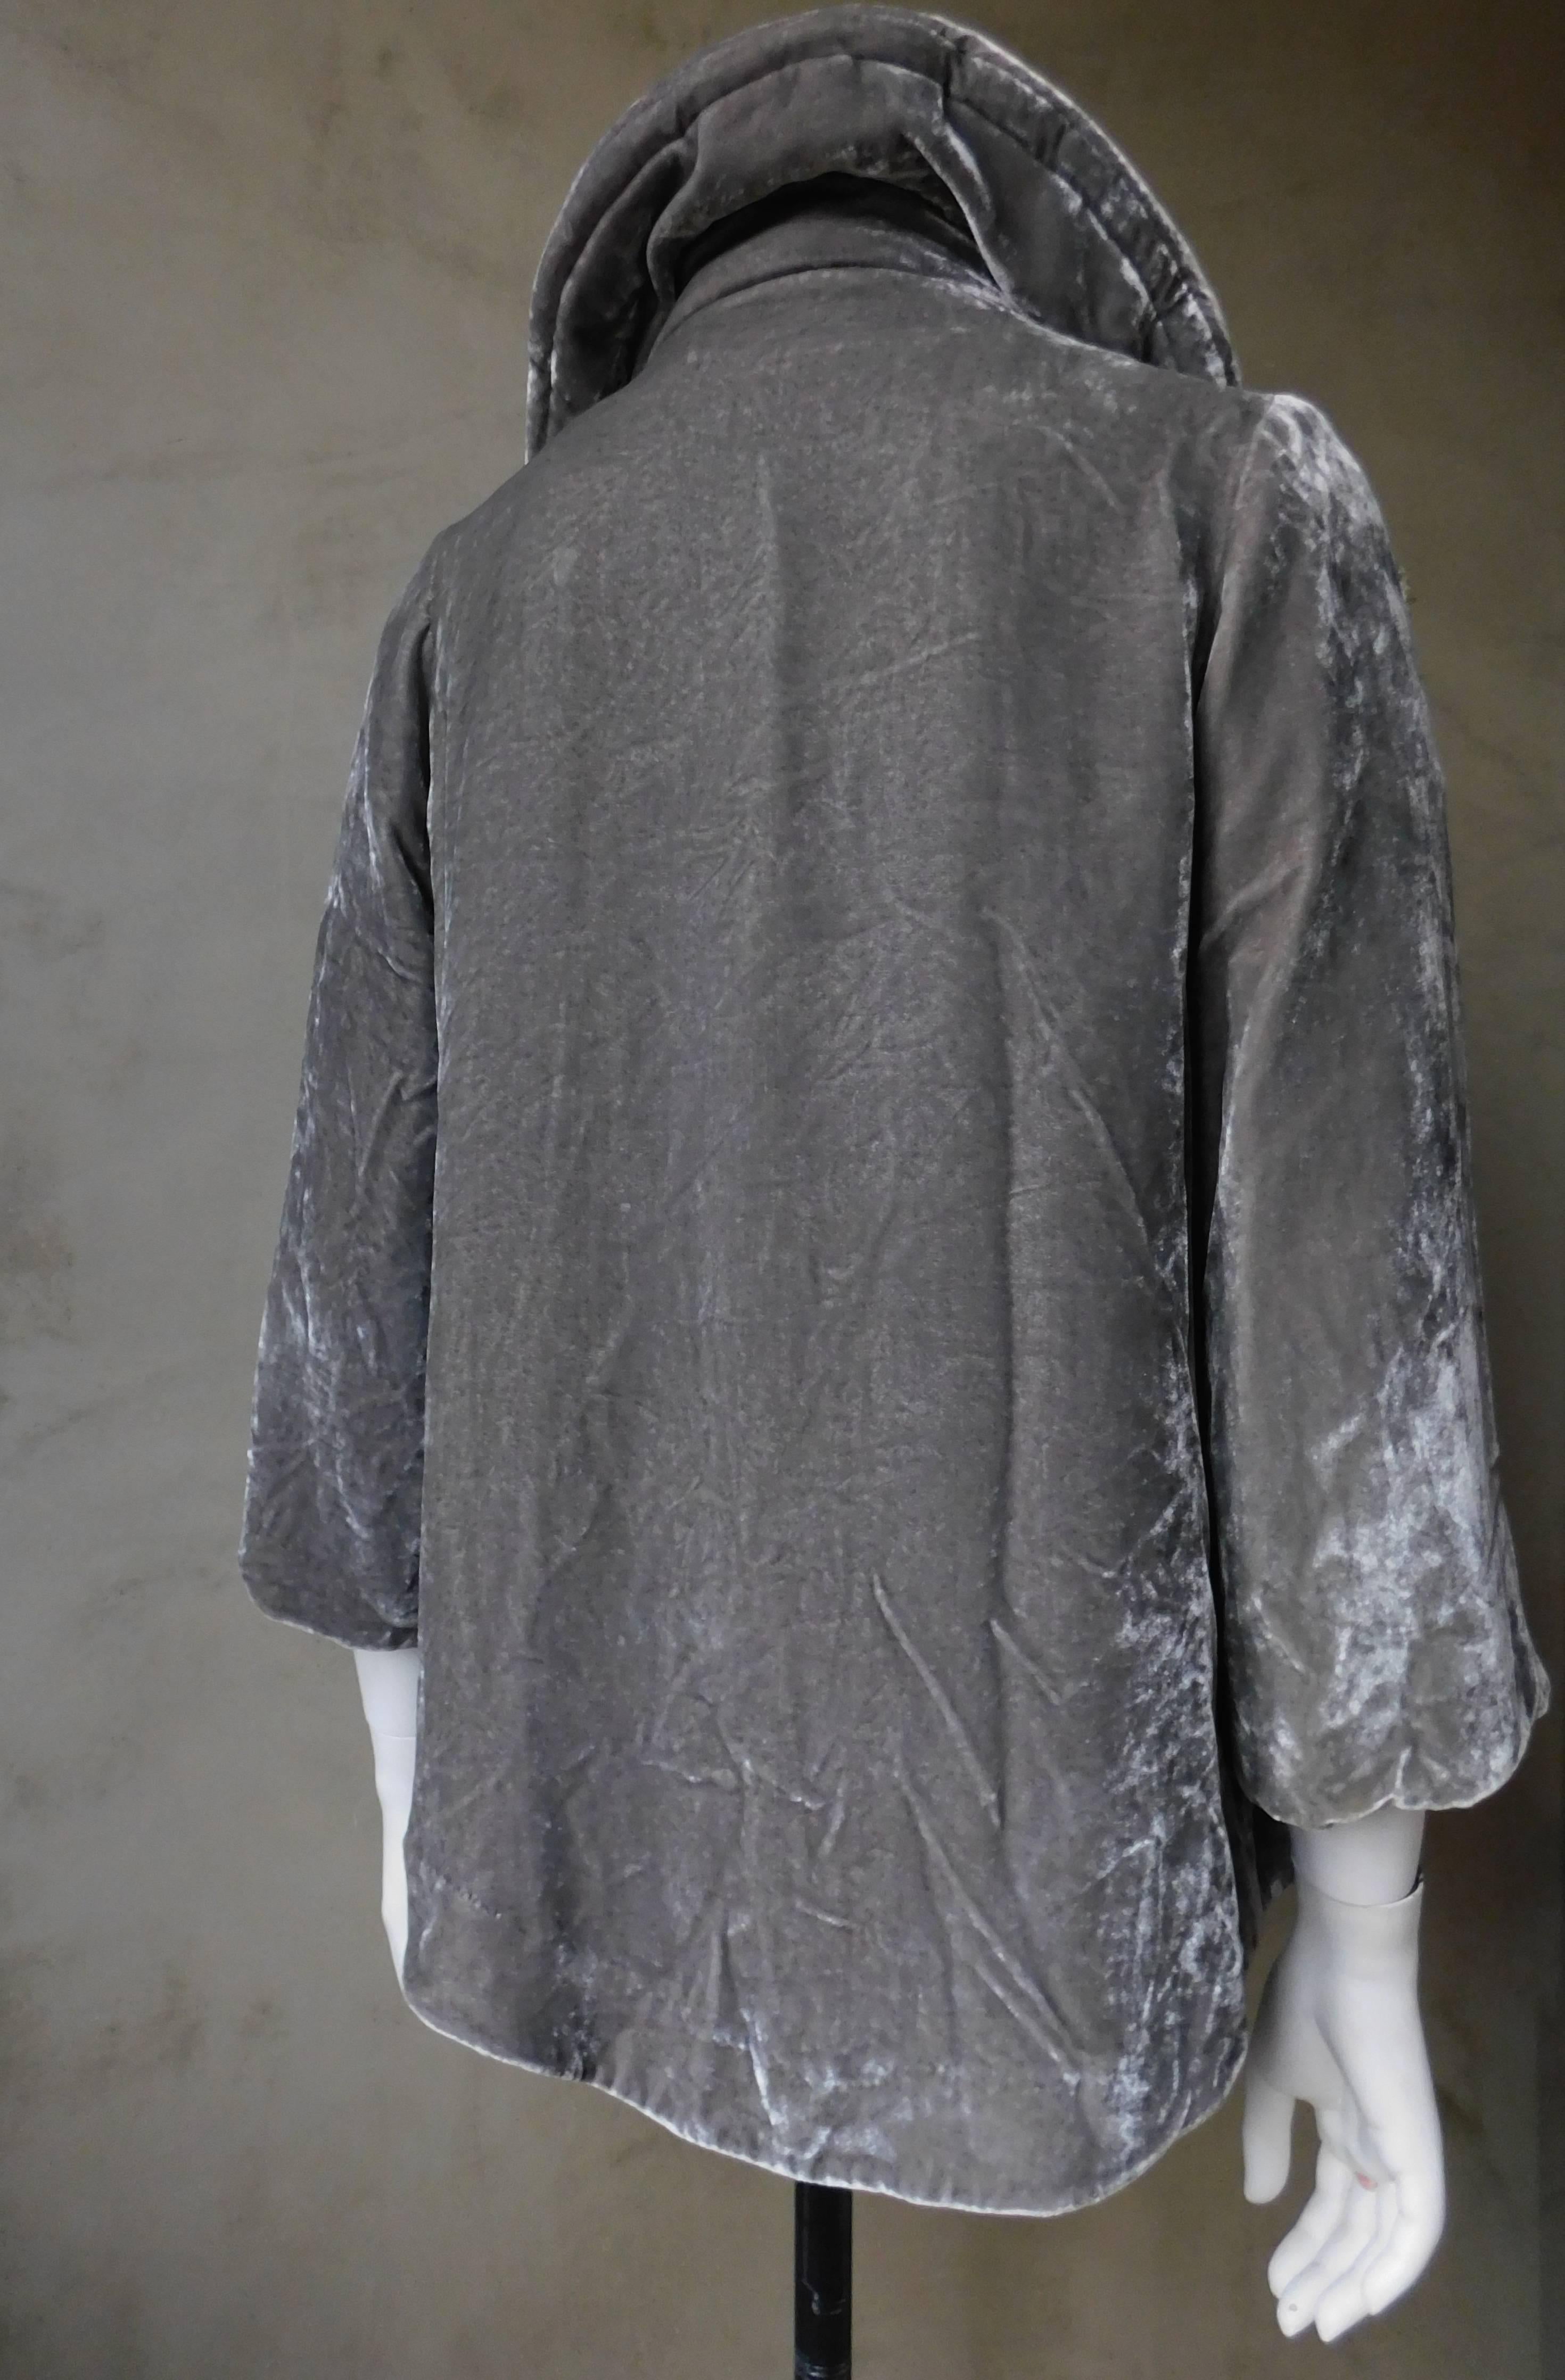  The Isabel Marant French brand started in 1994 , and quickly became known as the ultimate exporter of Parisienne style. This pewter gray velvet jacket has a padded collar inspired by the opera coats worn in the French Beaux Arts period. The simple